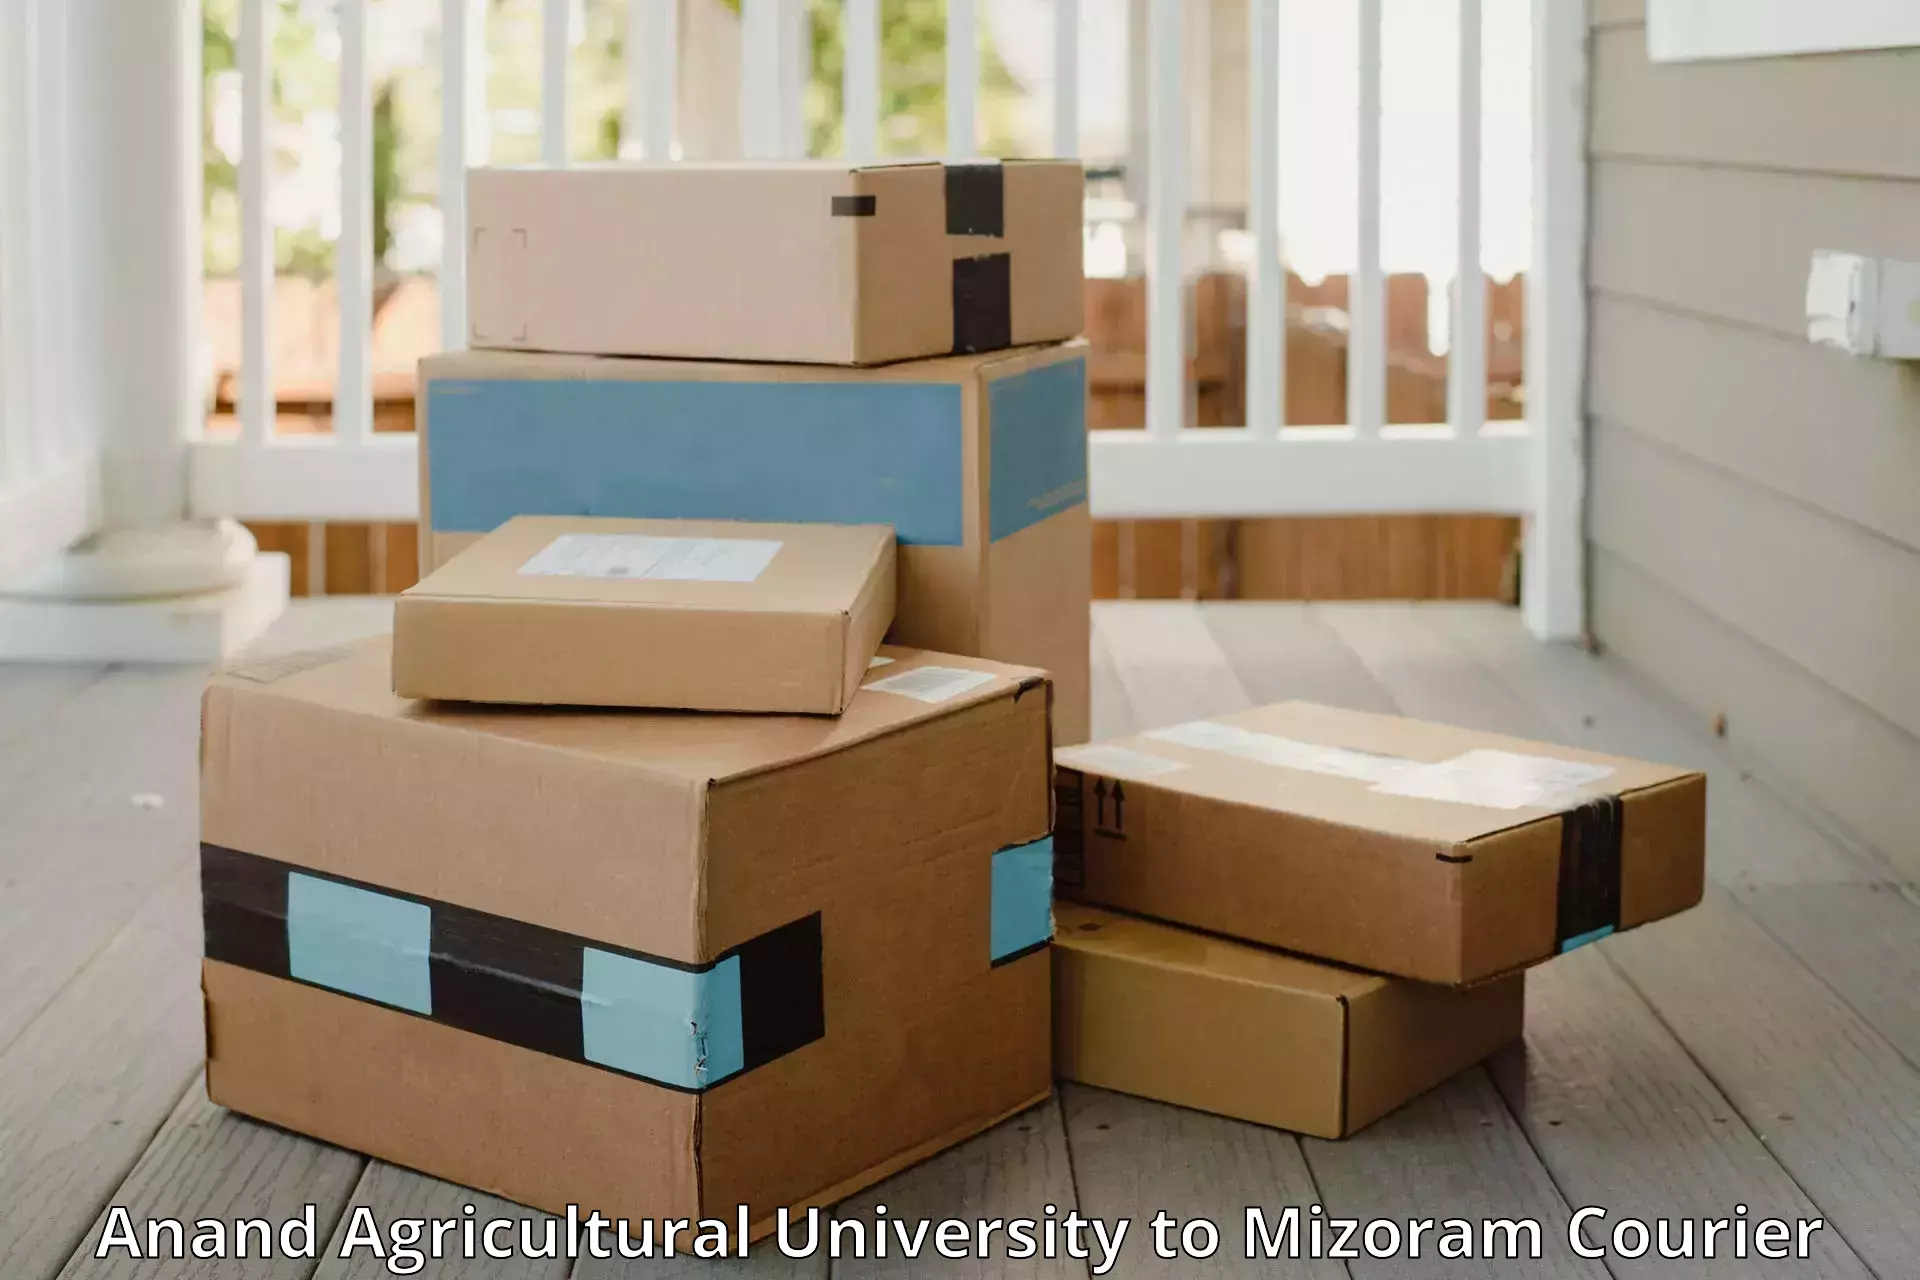 Baggage transport network Anand Agricultural University to Aizawl